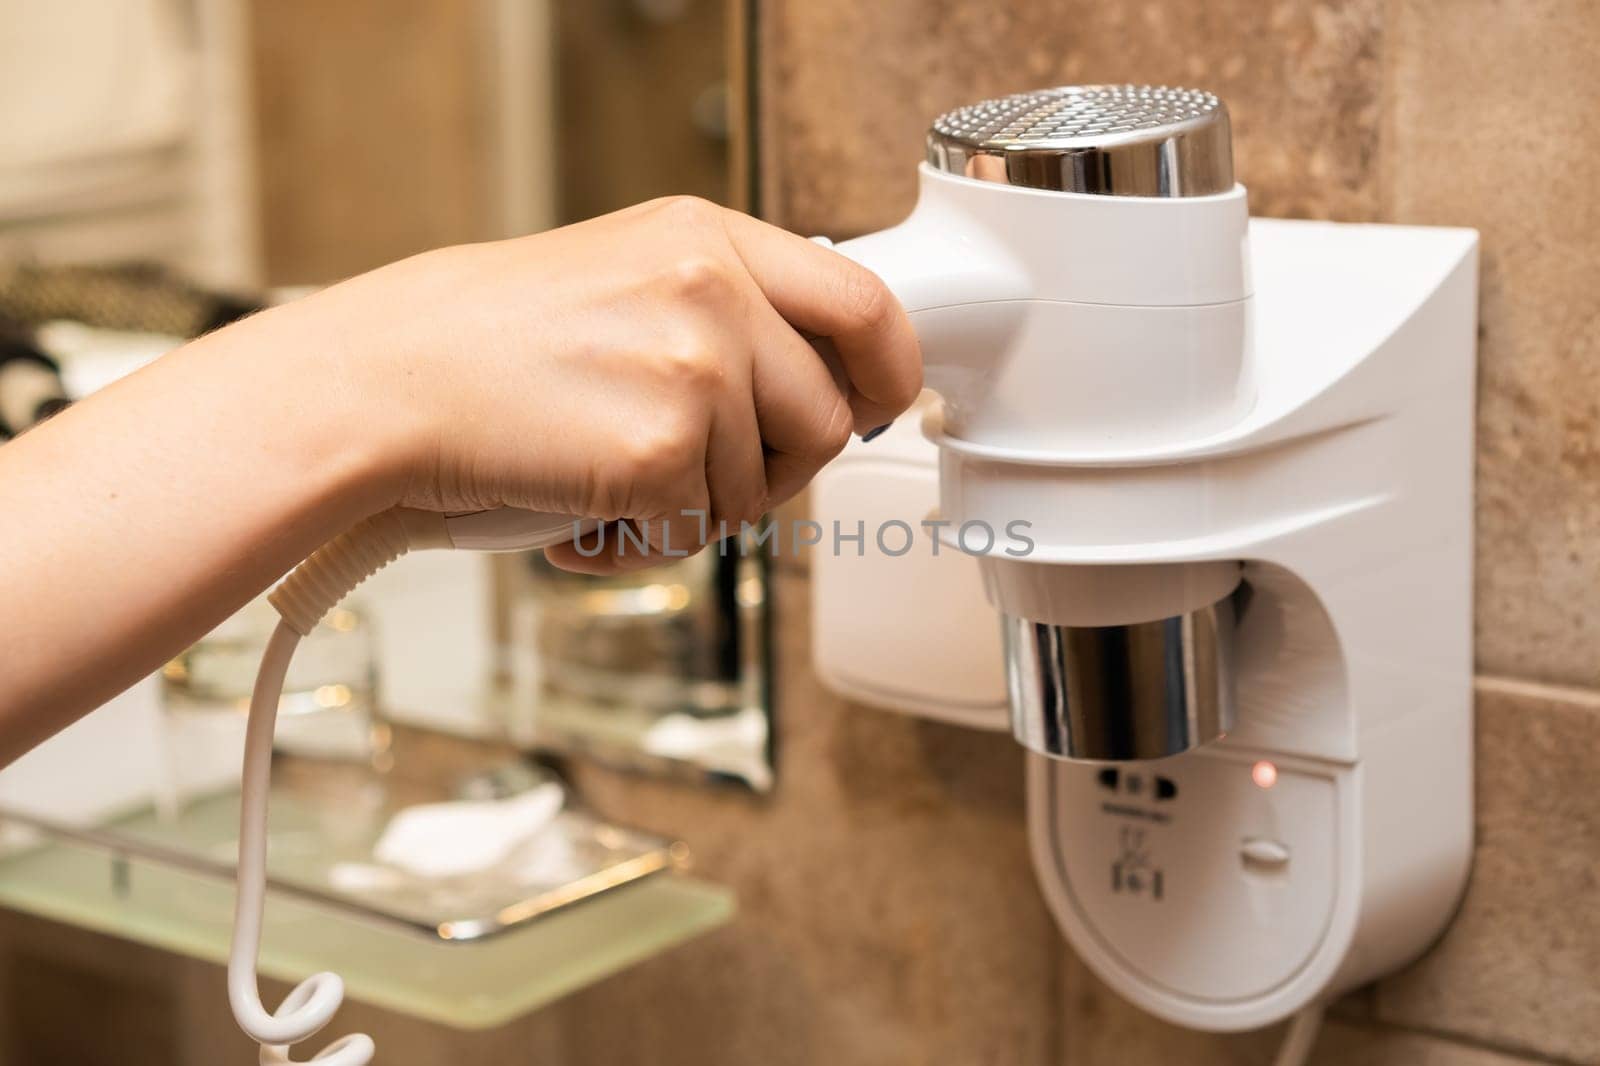 Woman takes a hair dryer with her hand in the bathroom.